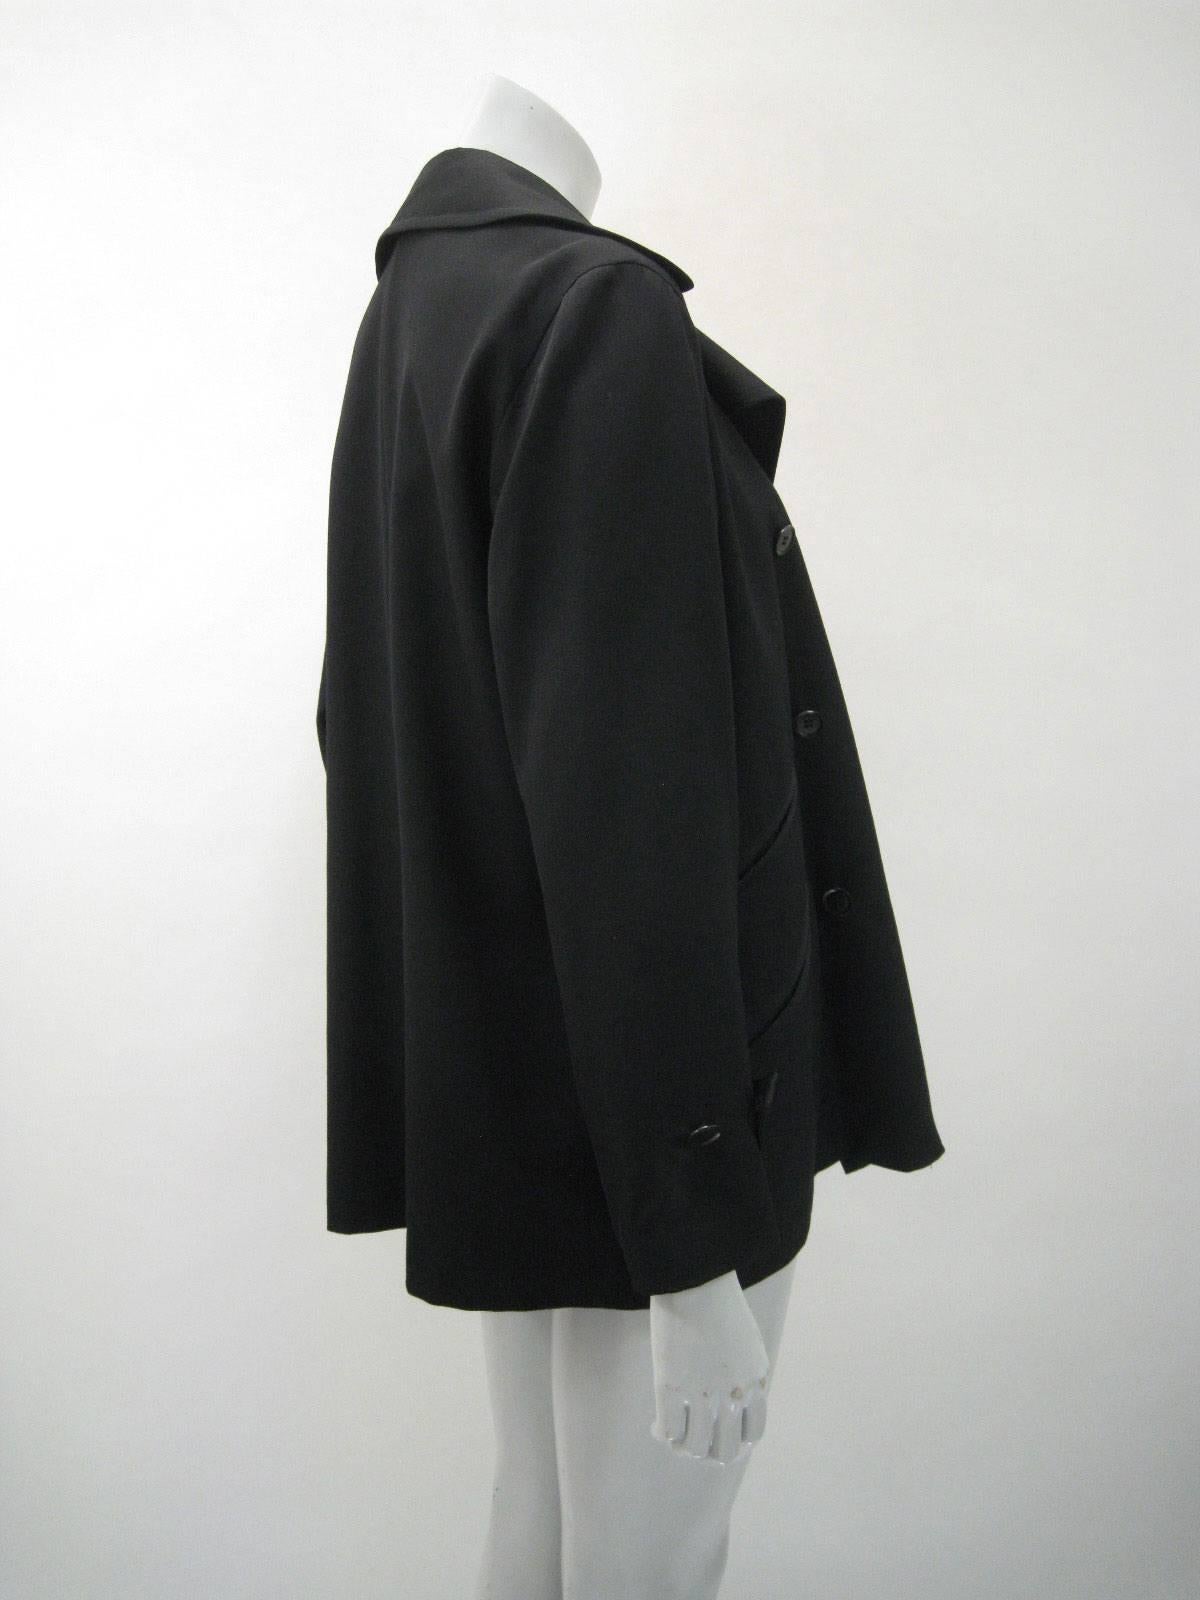 Y's Yohji Yamamoto Black Double Breasted Jacket In Excellent Condition For Sale In Oakland, CA